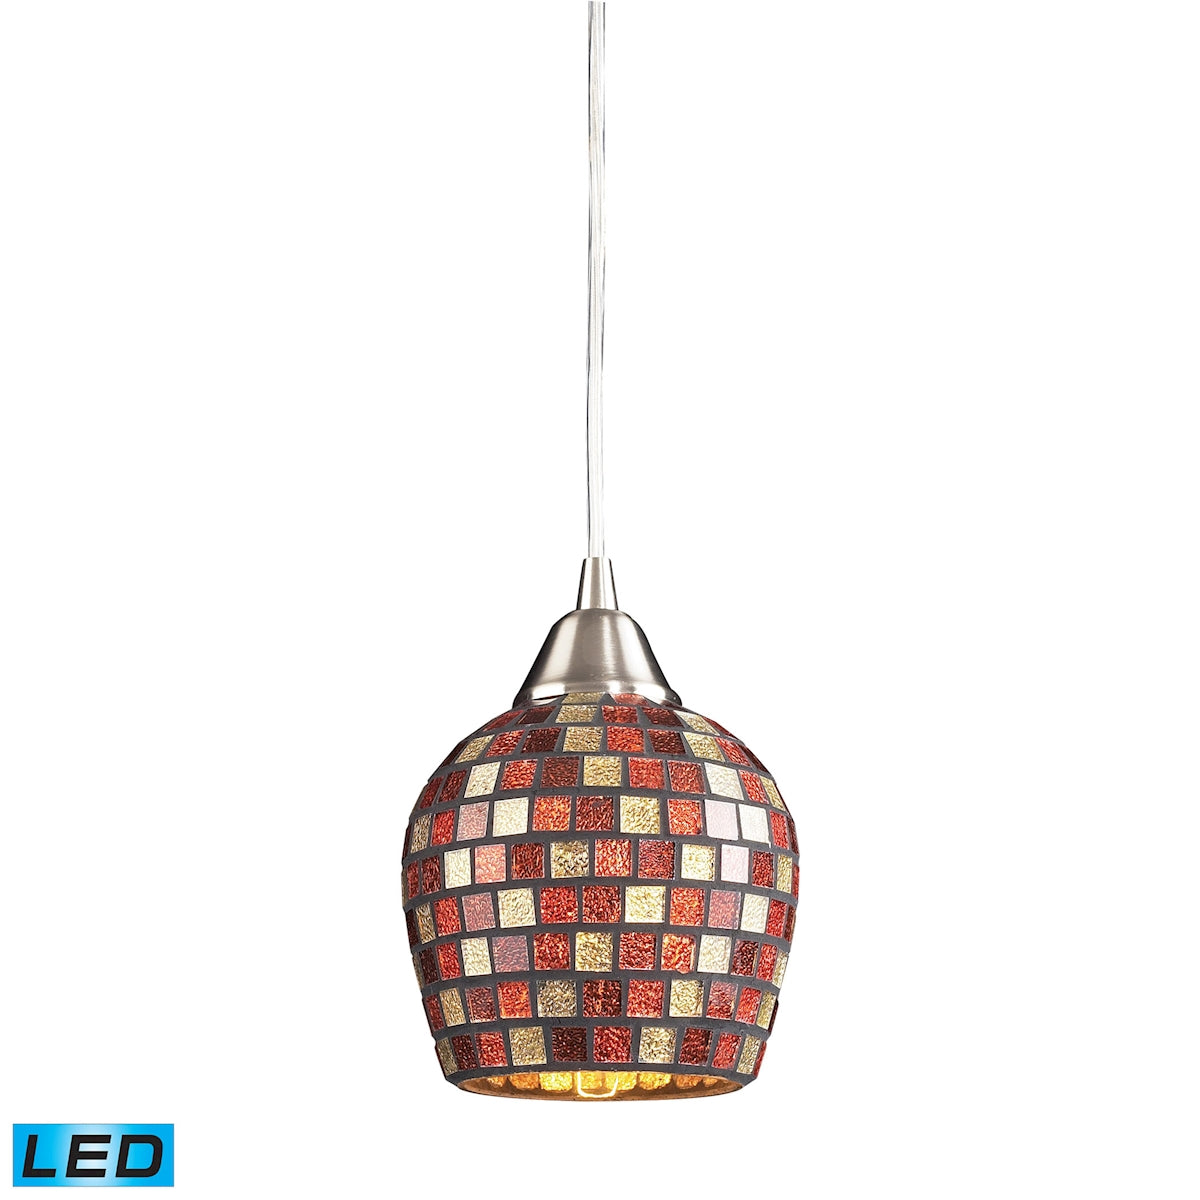 Fusion 1-Light Mini Pendant in Satin Nickel with Multi-colored Mosaic Glass - Includes LED Bulb